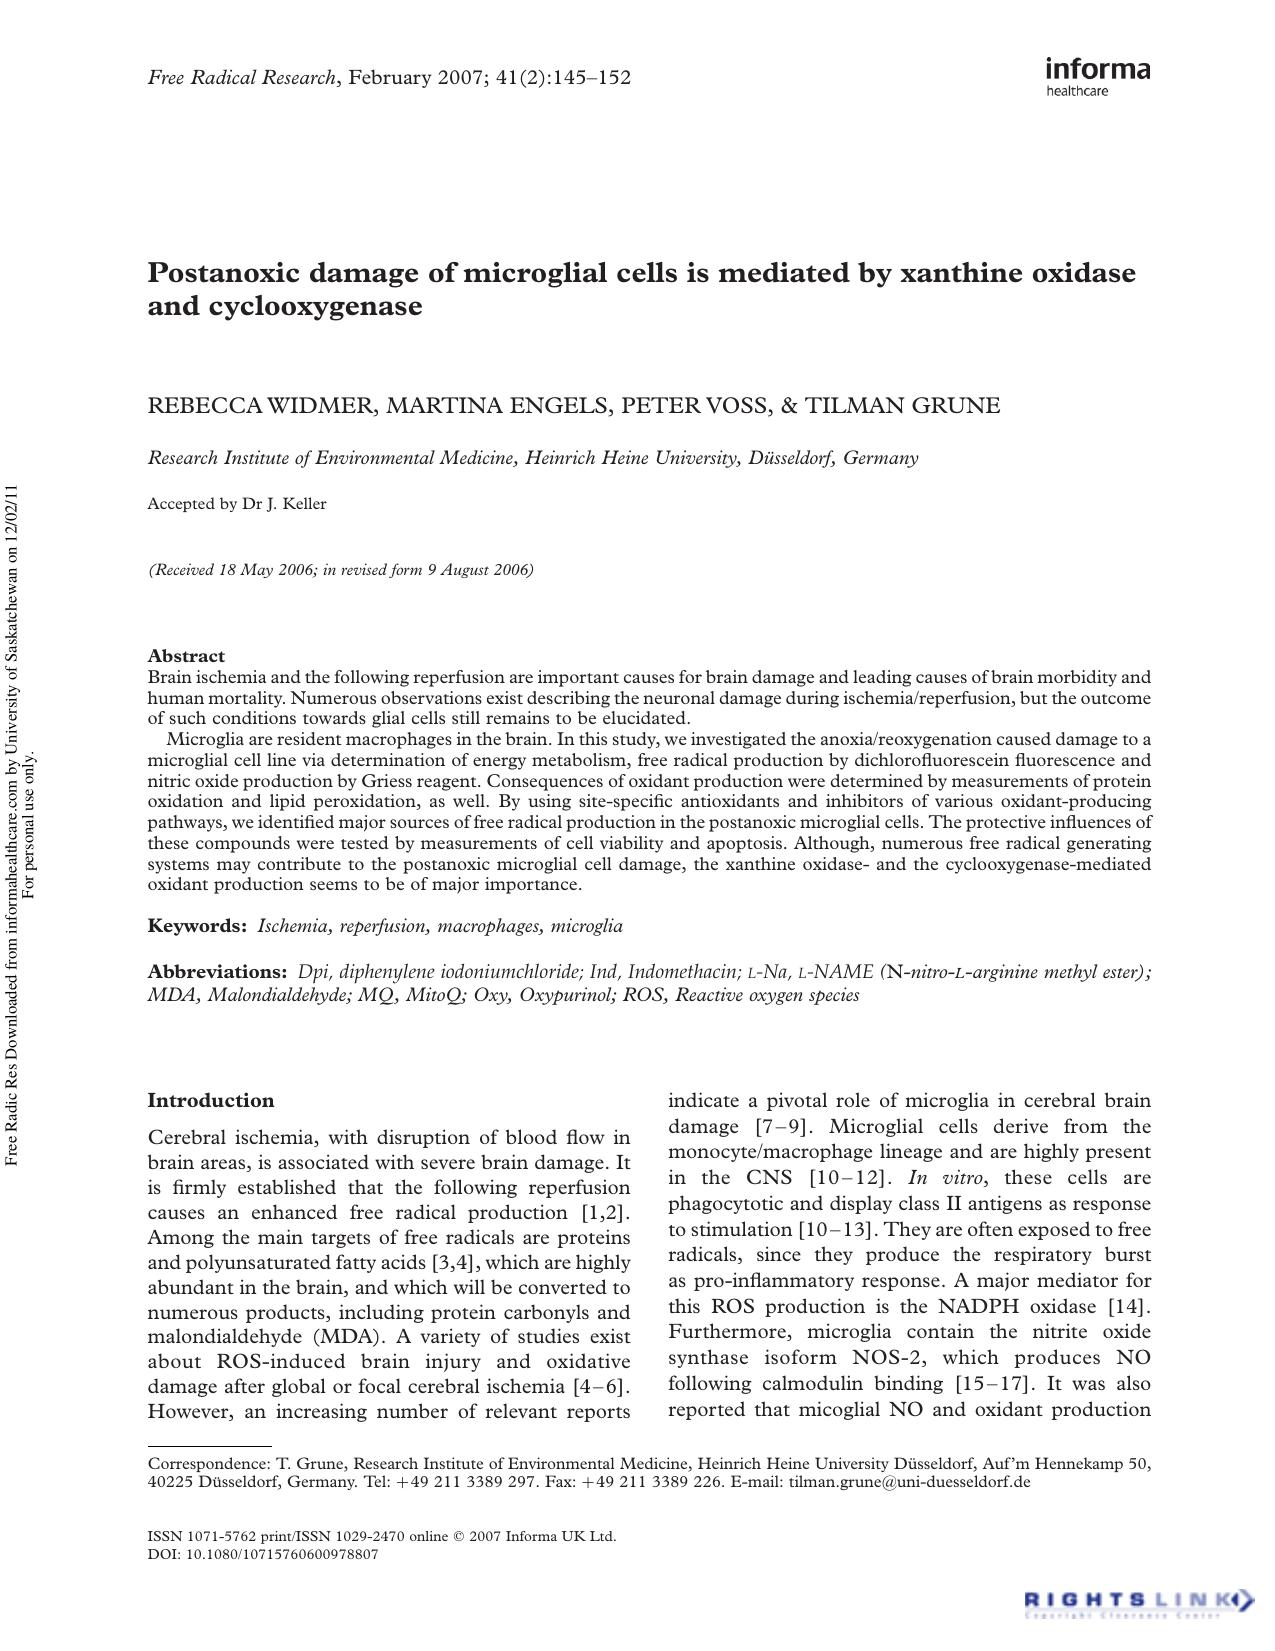 Postanoxic damage of microglial cells is mediated by xanthine oxidase and cyclooxygenase by Rebecca Widmer1 Martina Engels1 Peter Voss1 & Tilman Grune1†